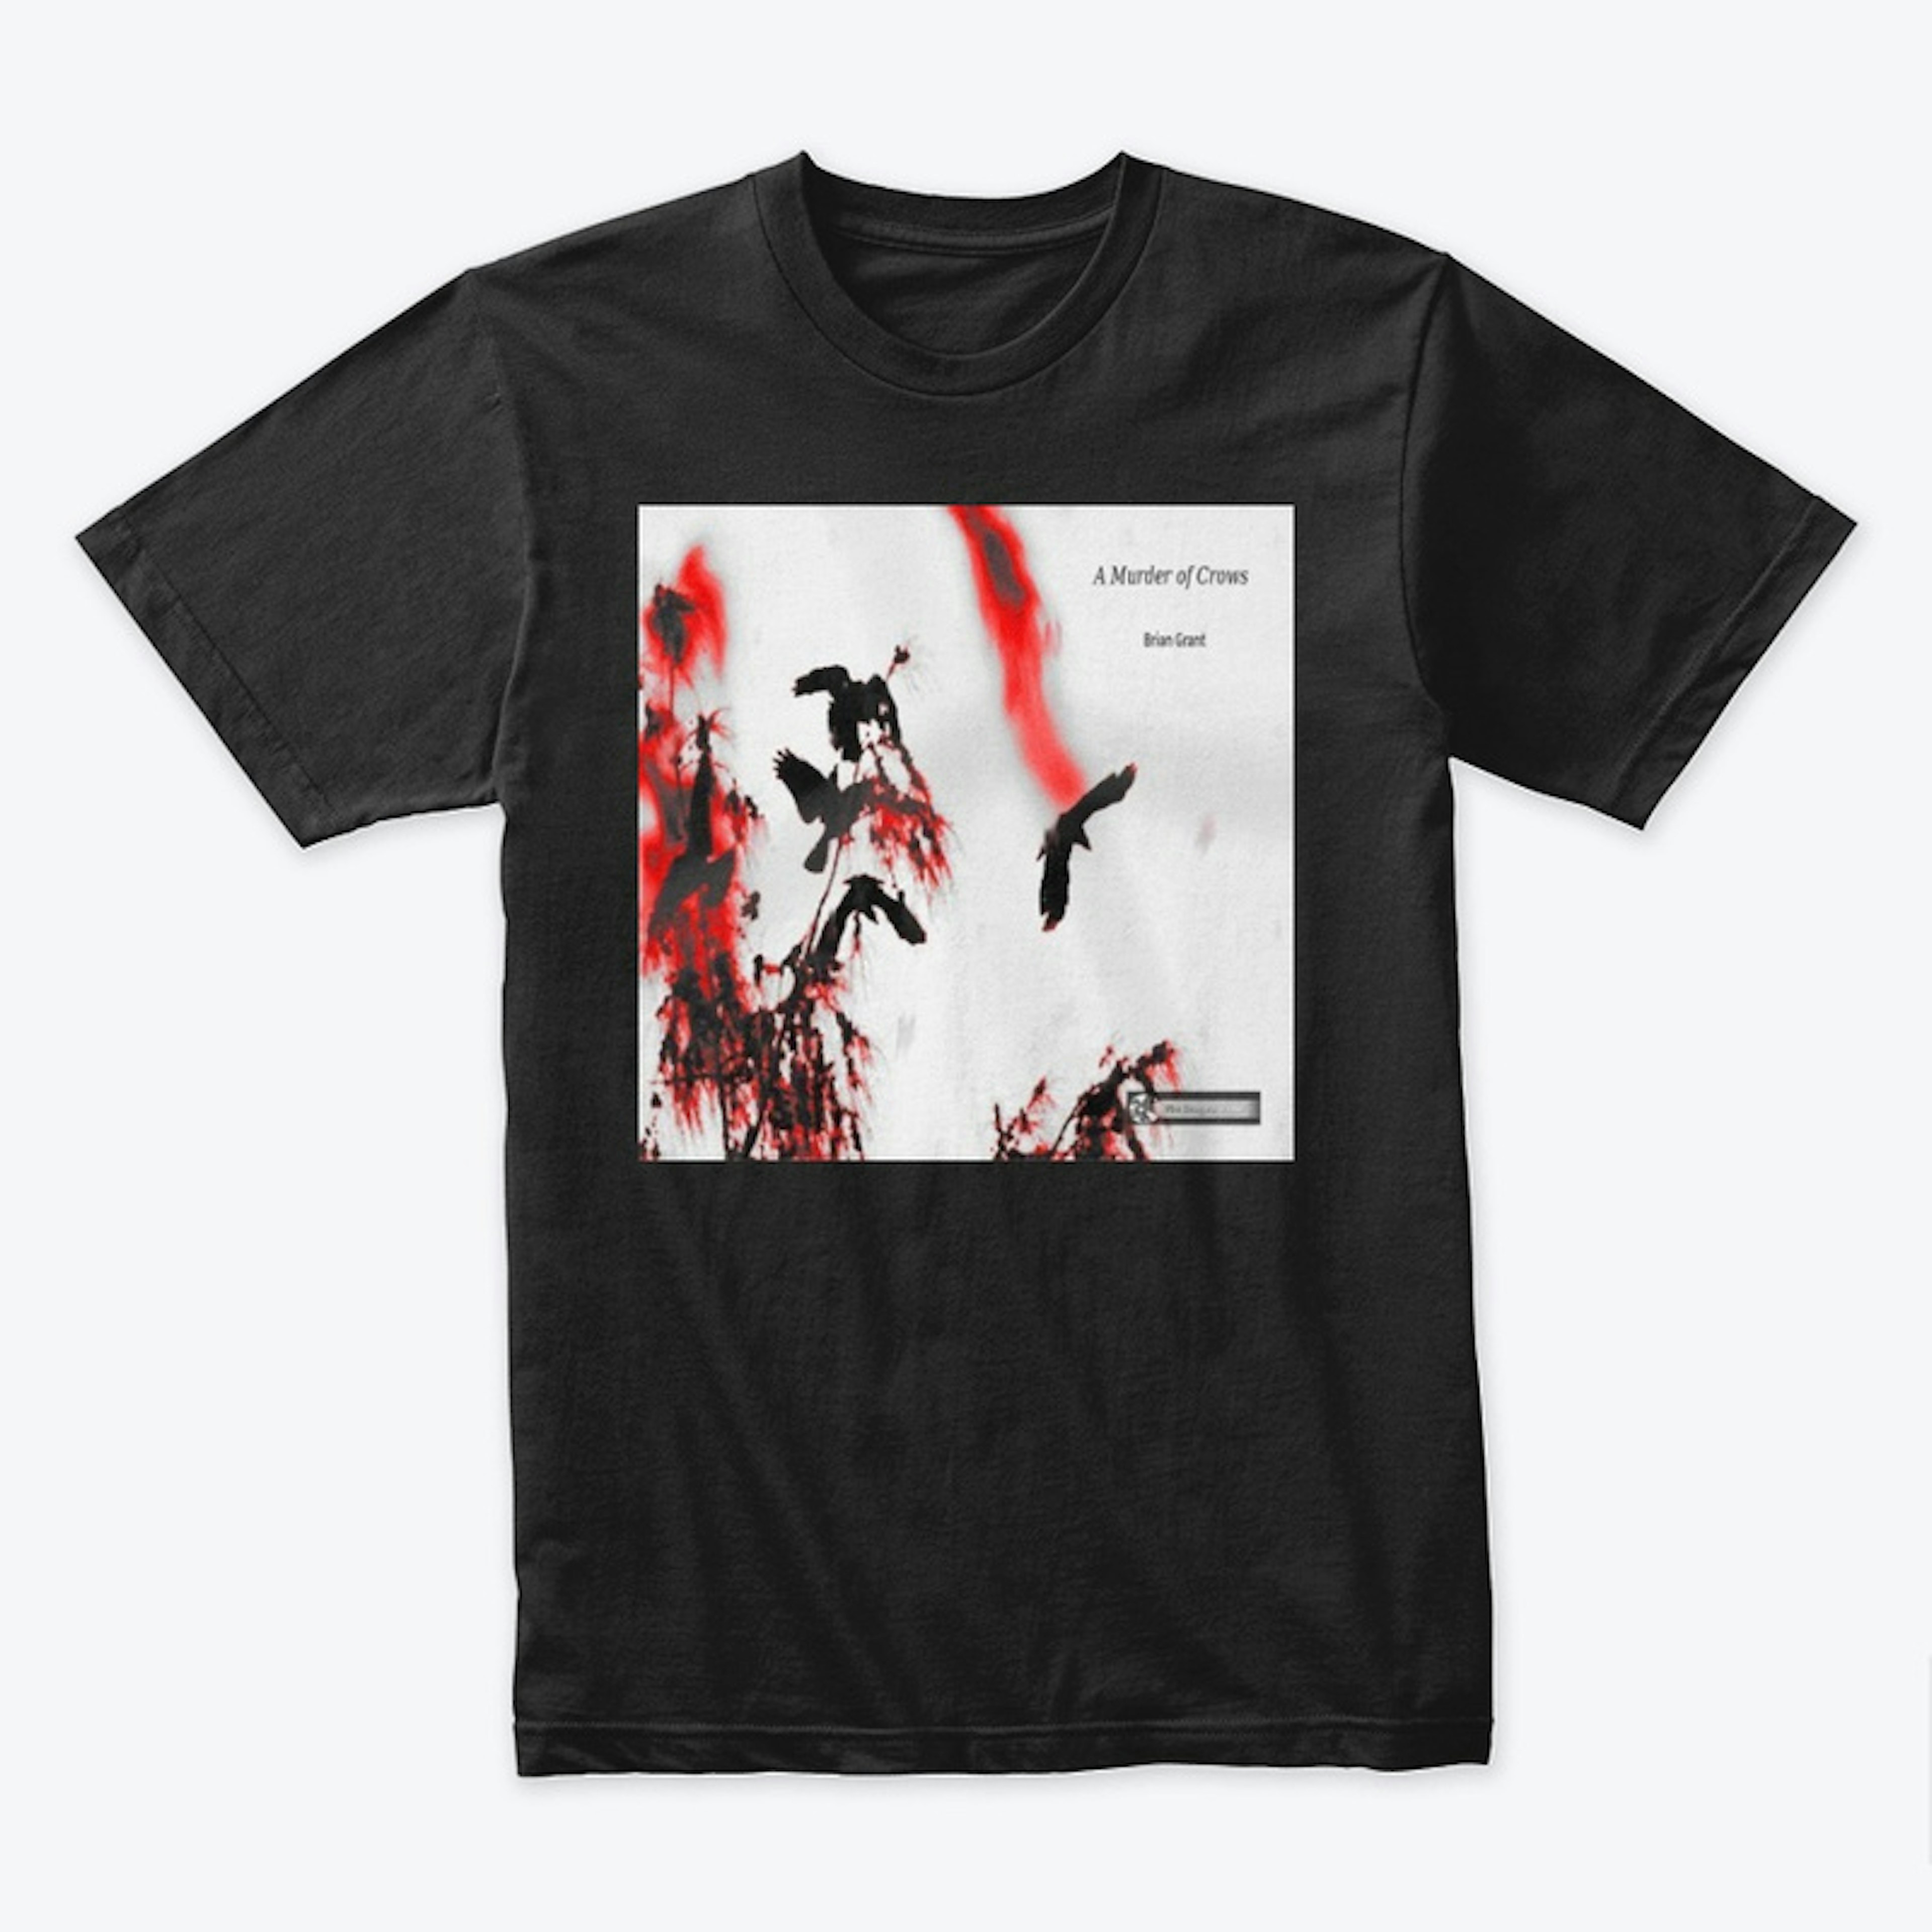 A Murder of Crows - Album Cover T-Shirt